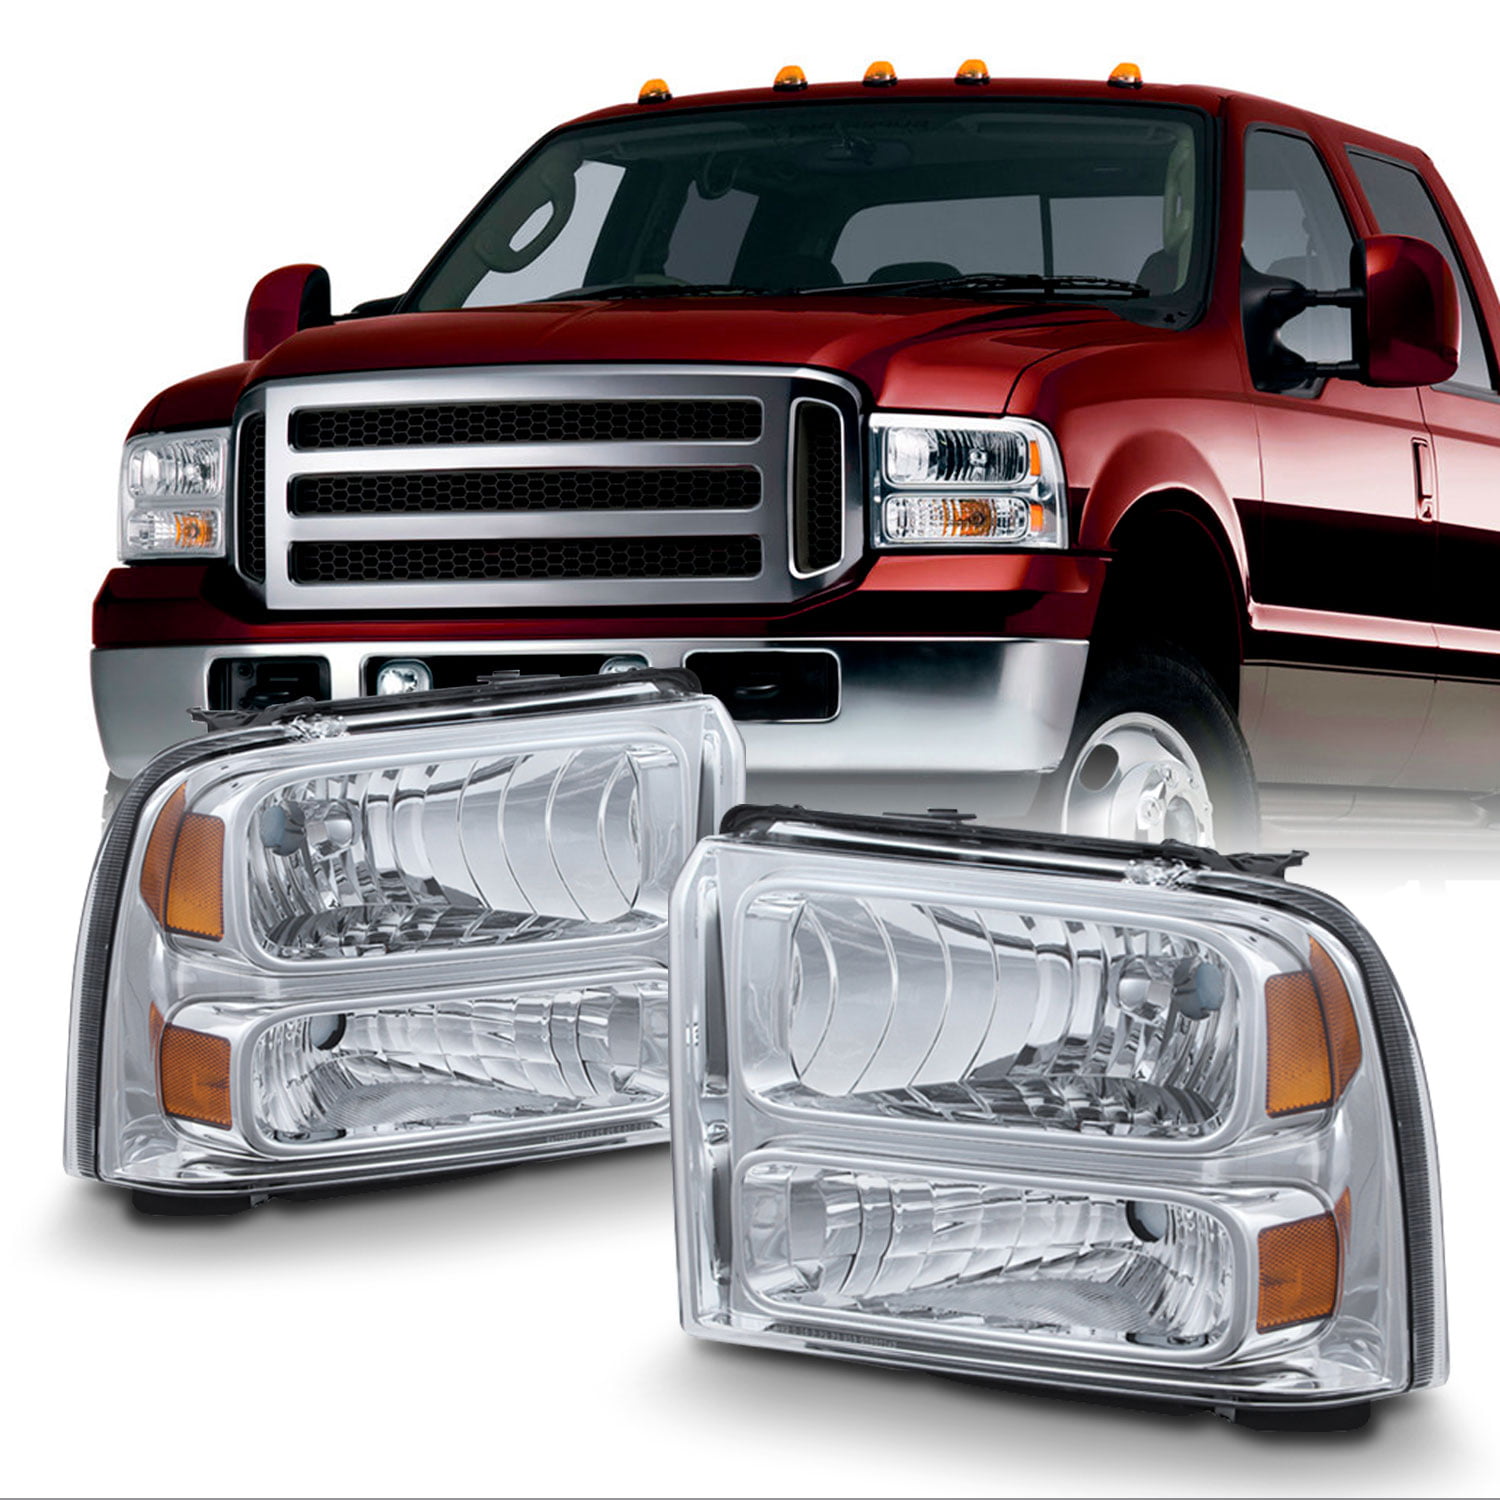 AUTOSAVER88 for 05 06 07 Ford F250 F350 F450 F550 Super Duty/ 05 Ford Excursion Headlight Assembly,OE Projector Headlamp,Chrome Housing Clear Lens,One-Year Limited Warranty Driver and Passenger Side